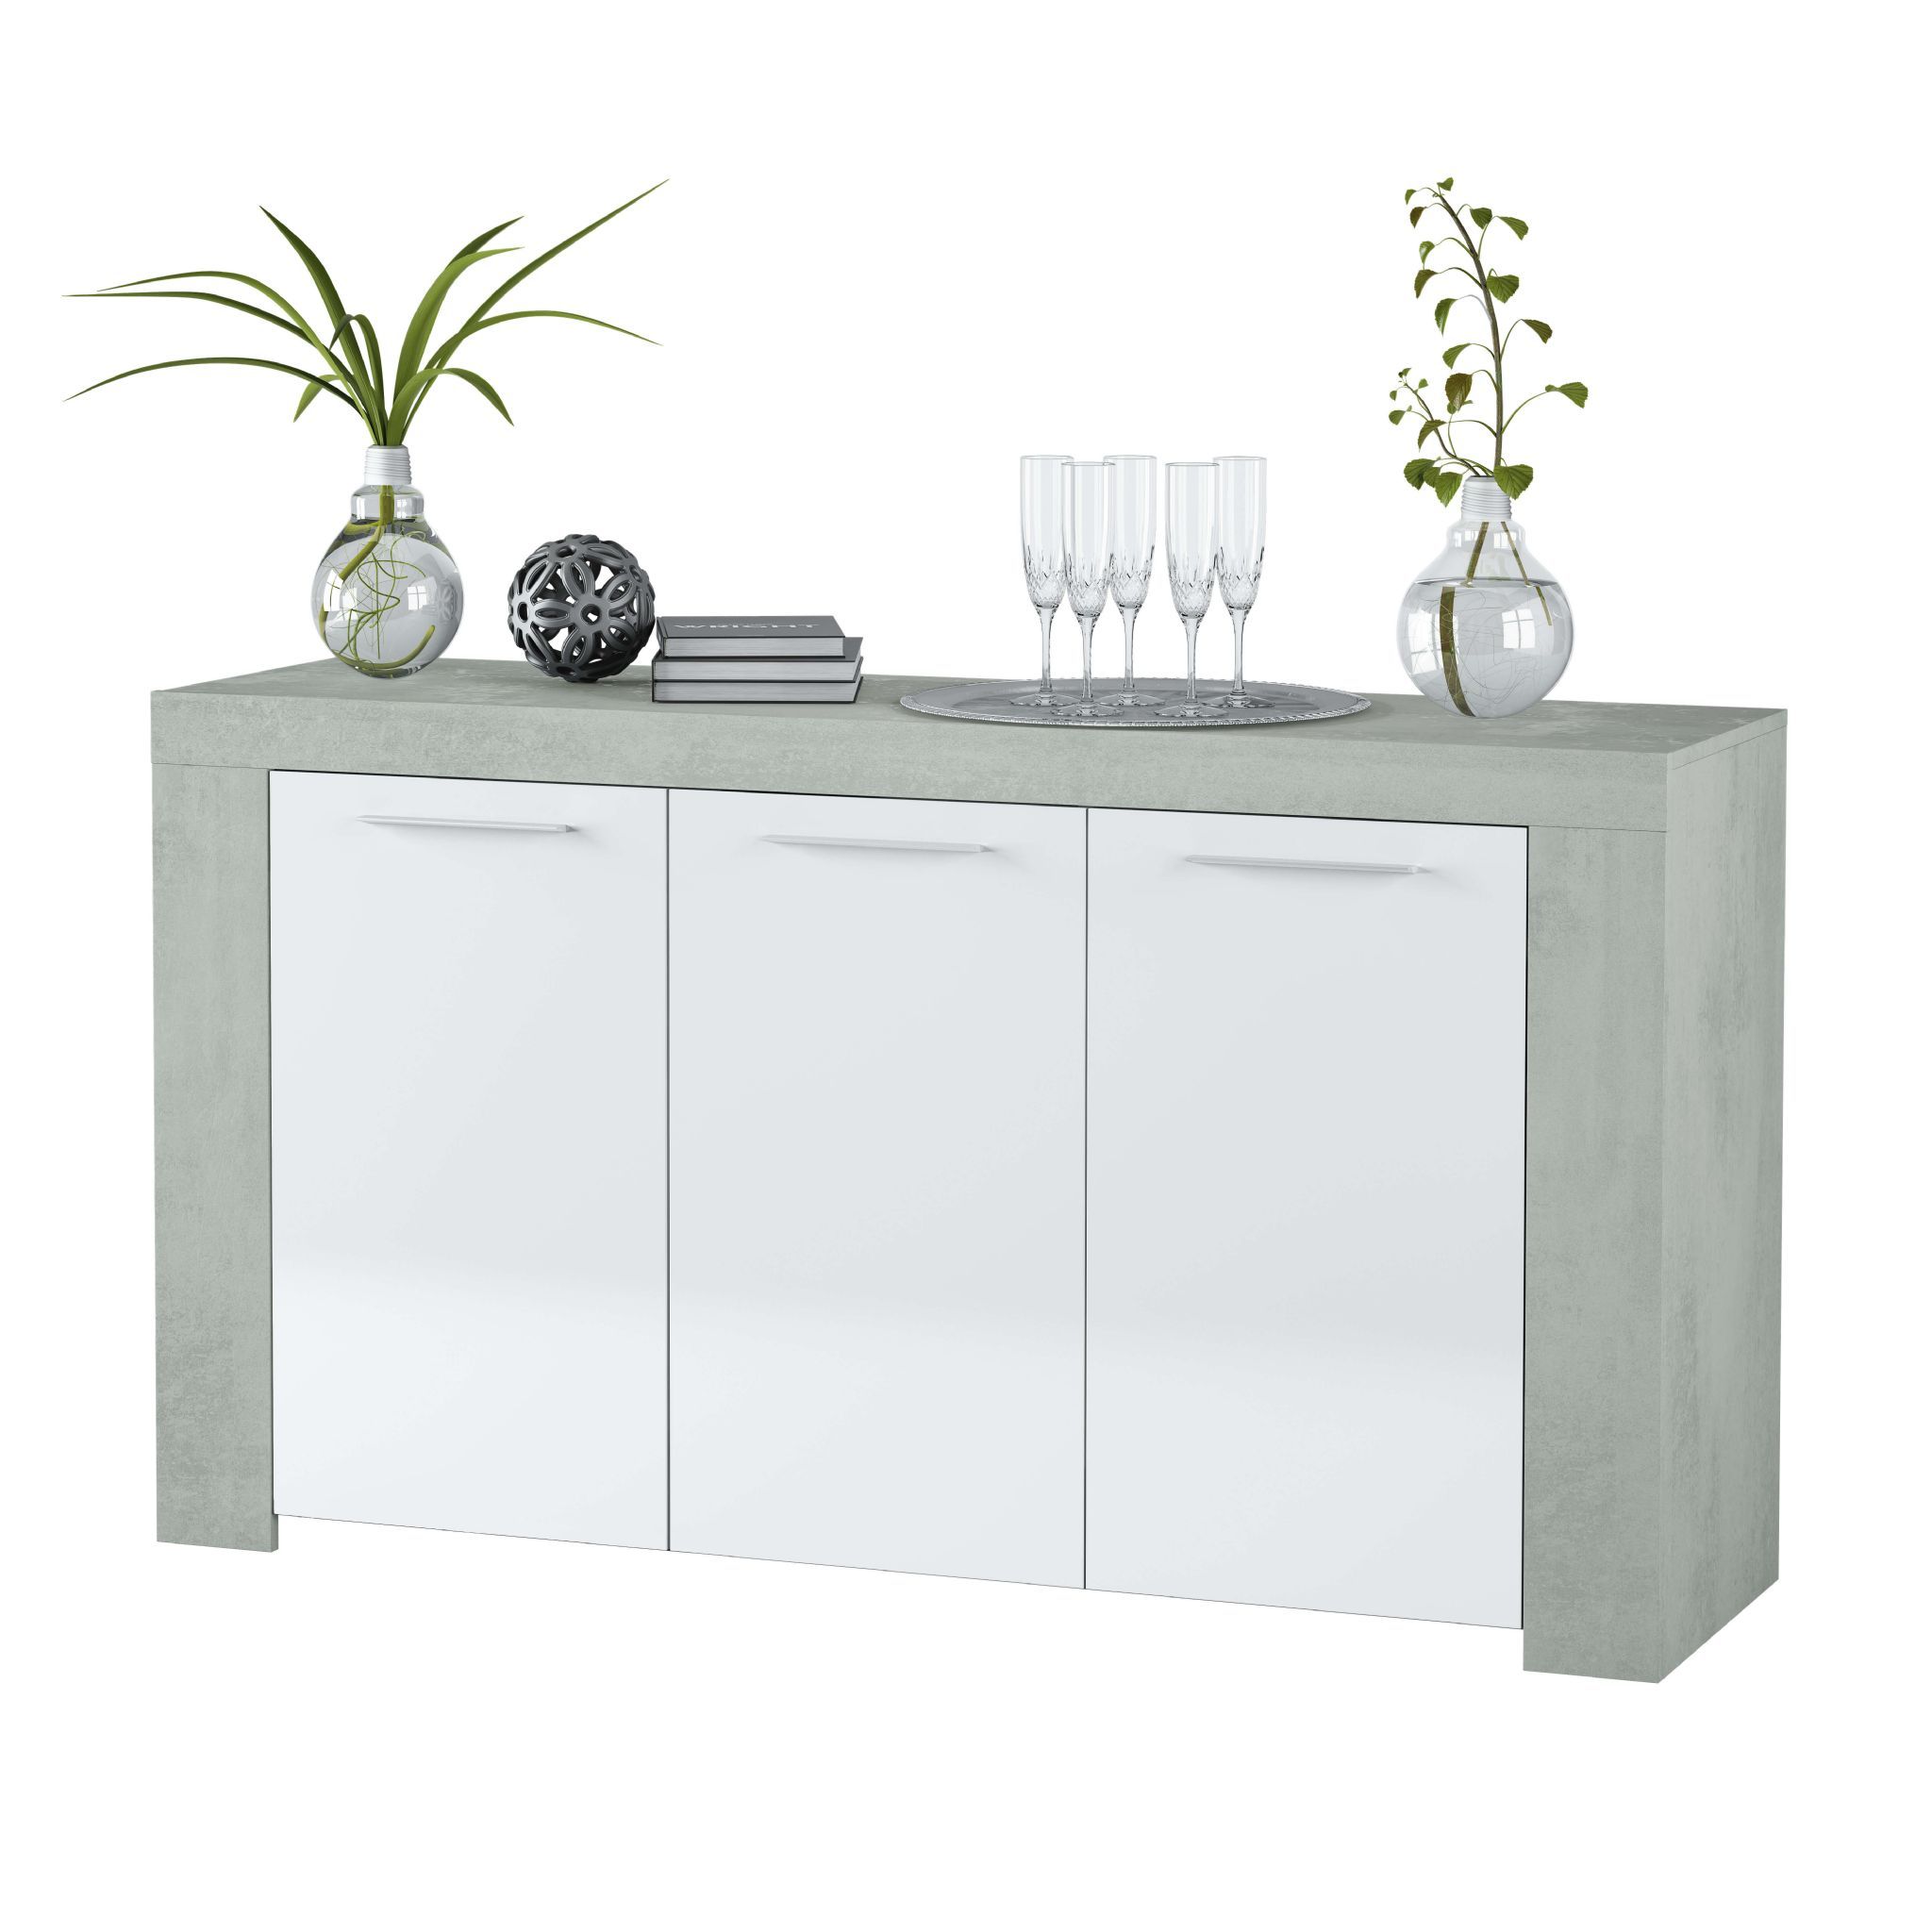 Cubo Grey And White Sideboard – Sale At Furniturefactor Intended For White And Grey Sideboards (View 21 of 30)